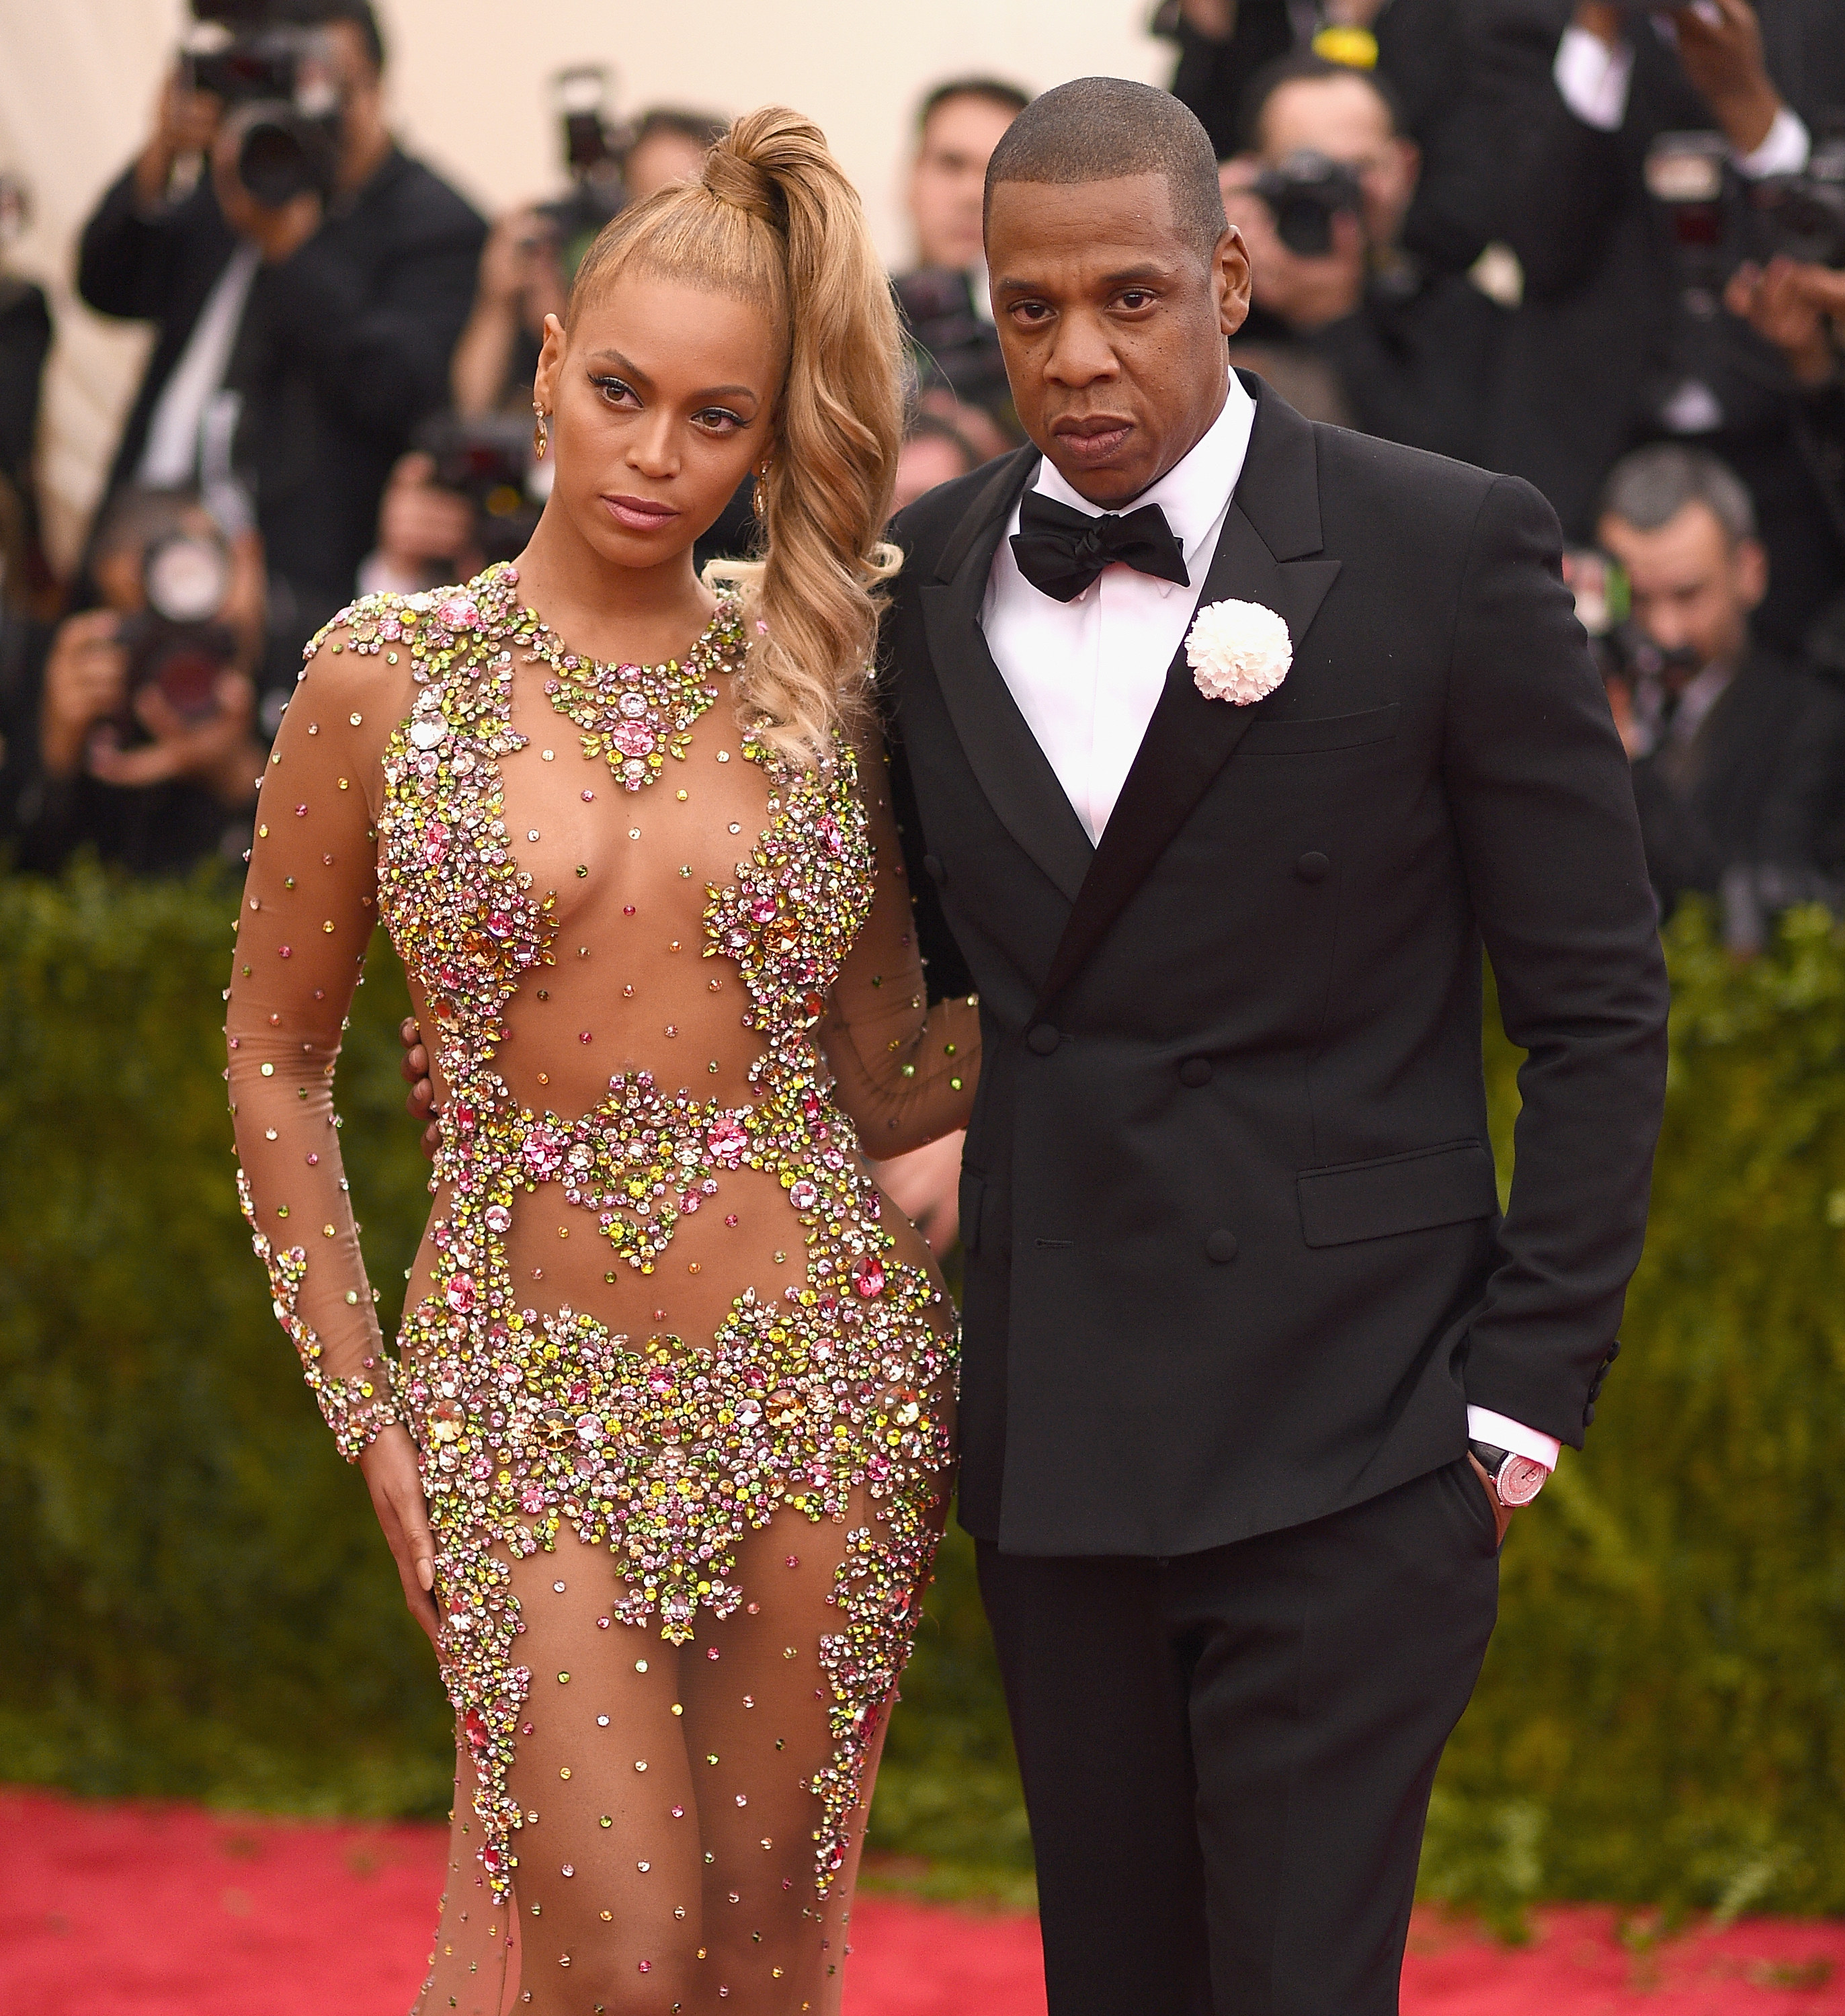 Beyonce and Jay-Z at Met Gala in 2015 where Beyonce is wearing a bedazzled dress and Jay-Z a suit